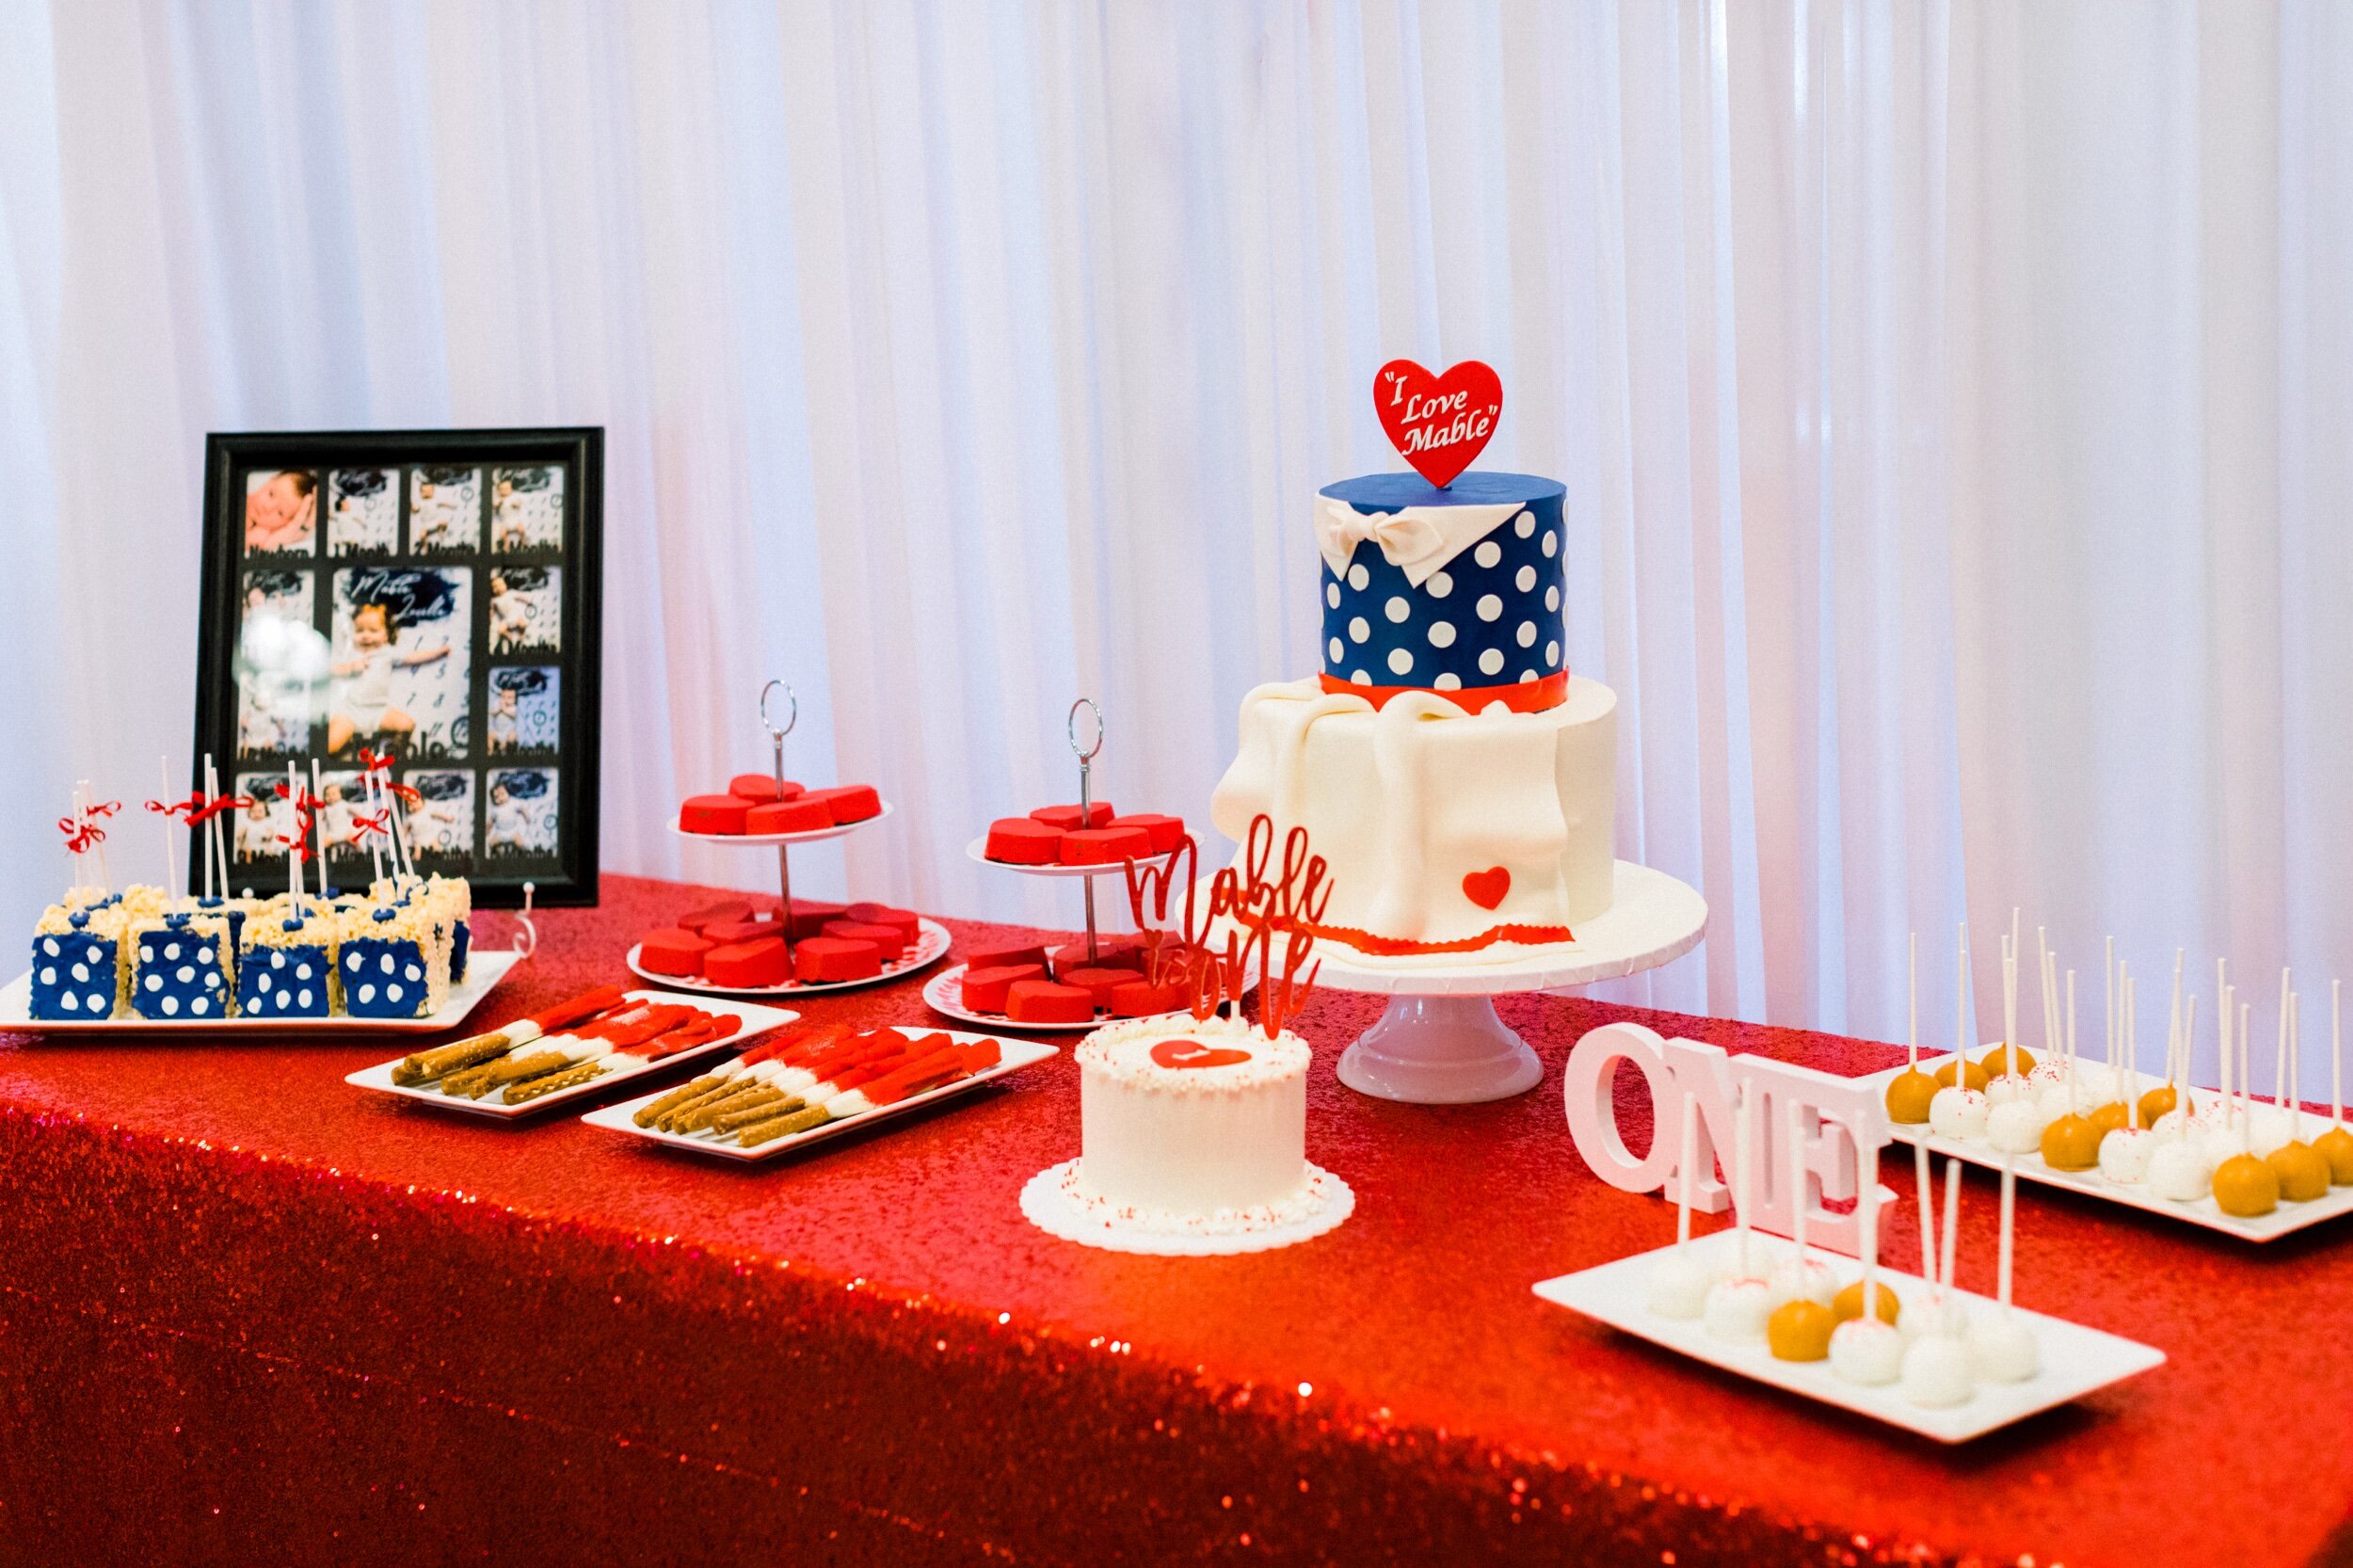  I Love Lucy Themed First Birthday on Hello Rascal Kids. Family lifestyle blog for parents and kids. 